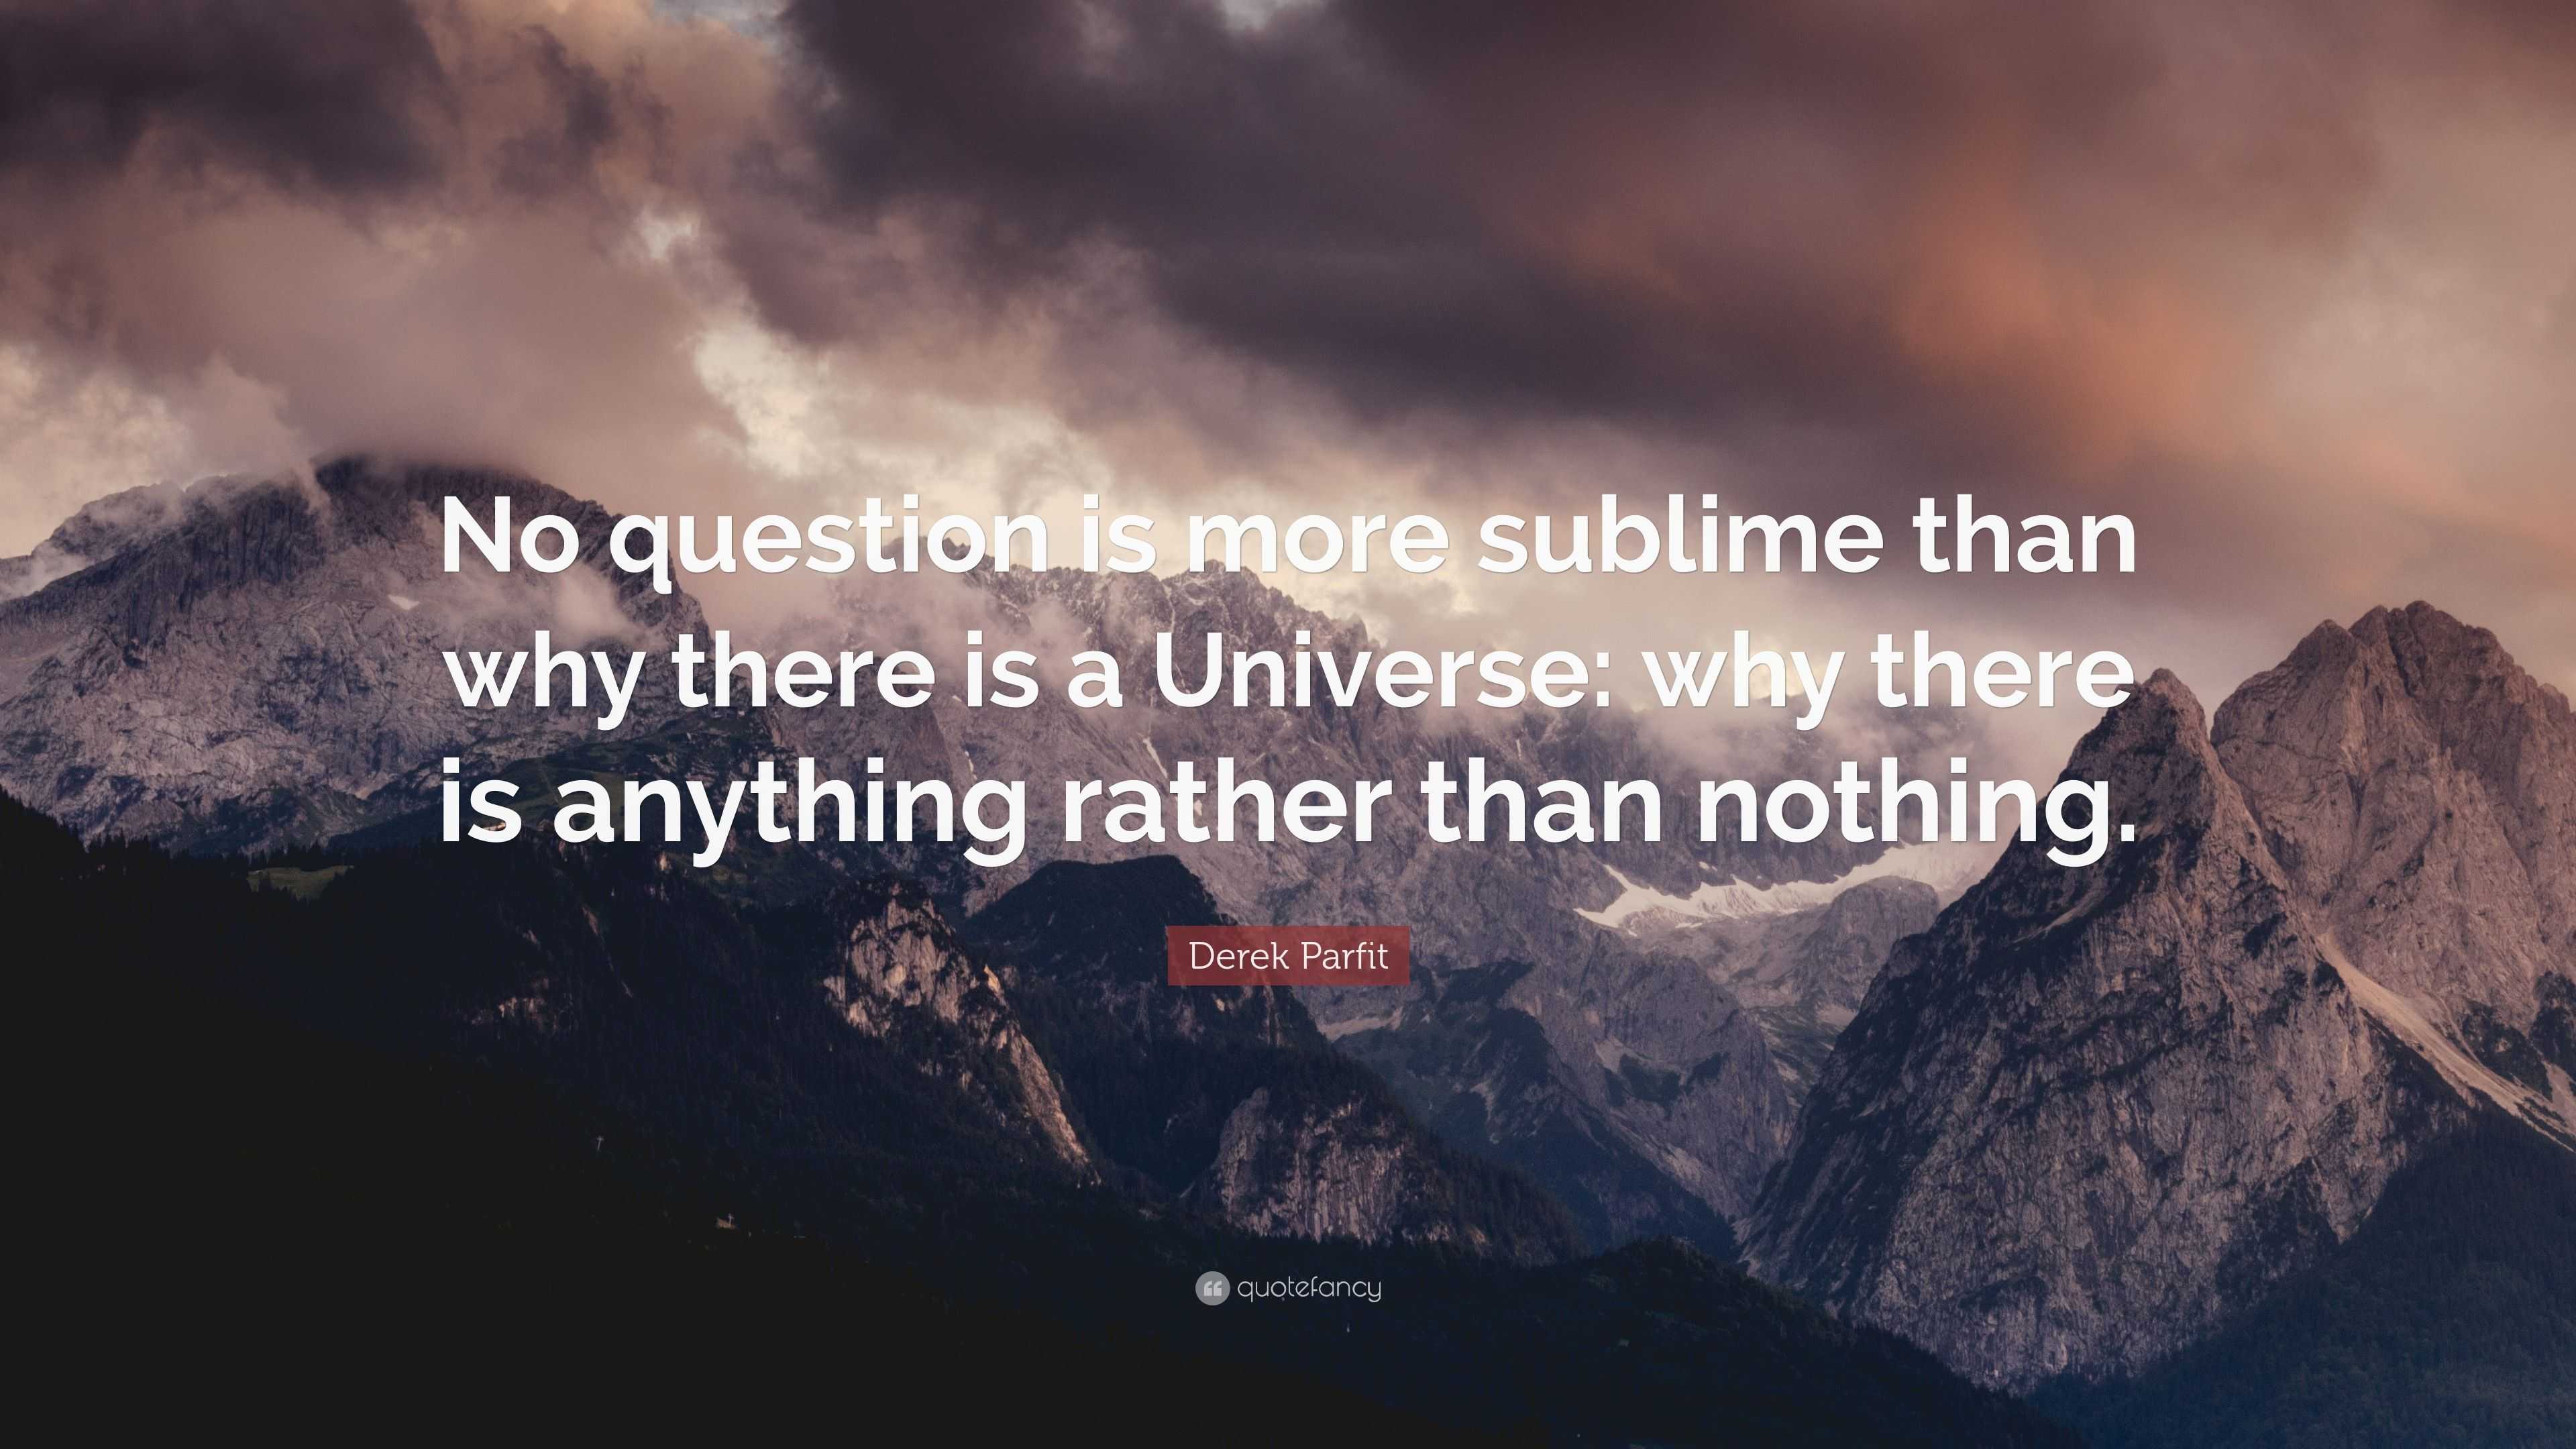 Derek Parfit Quote: “No question is more sublime than why there is a ...